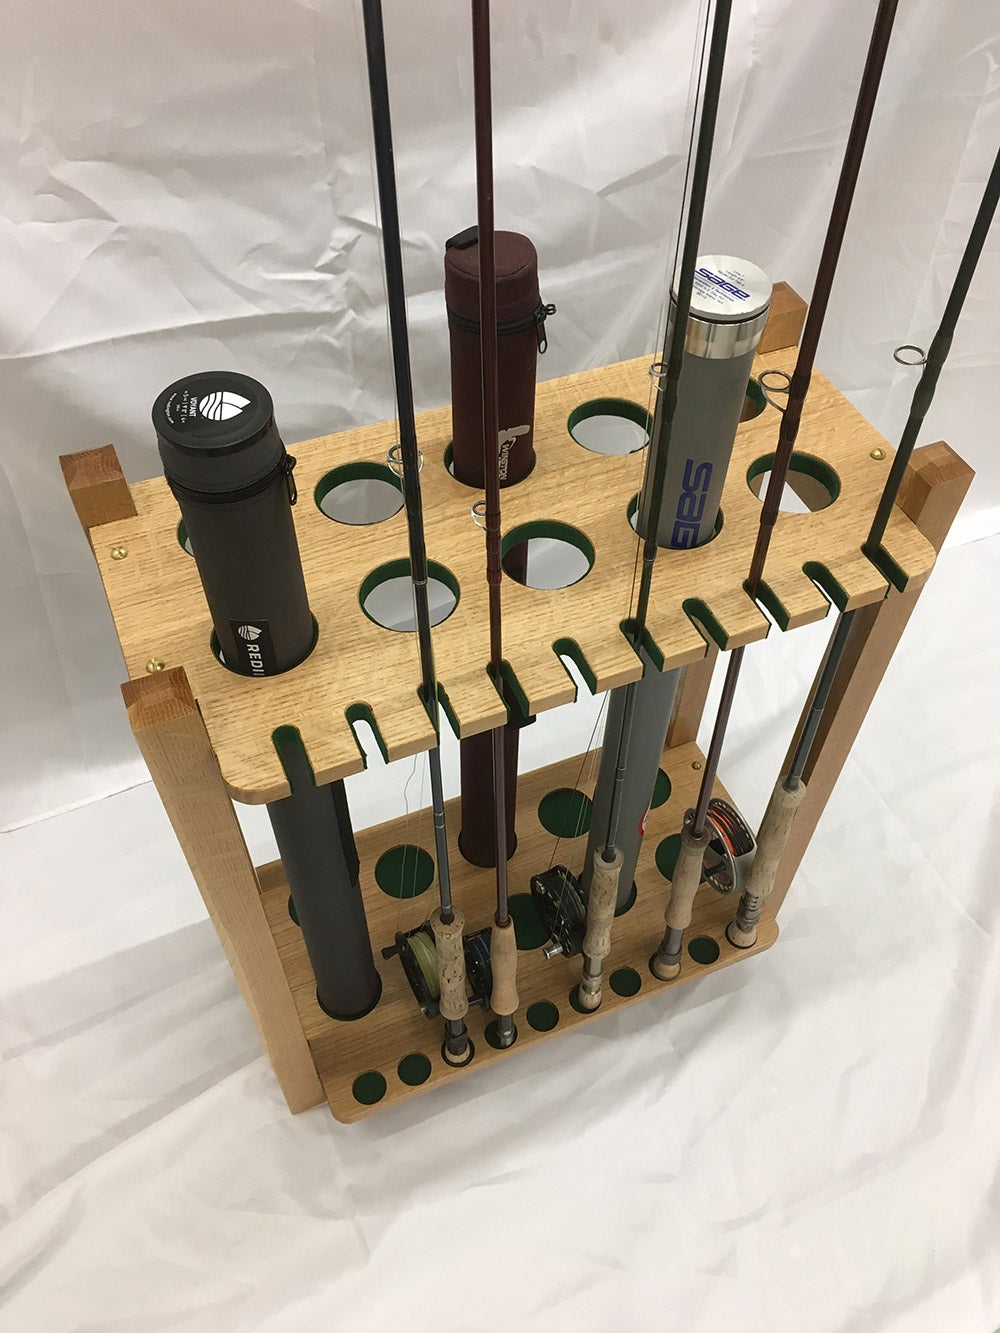 Fly rod rack, show me what you got